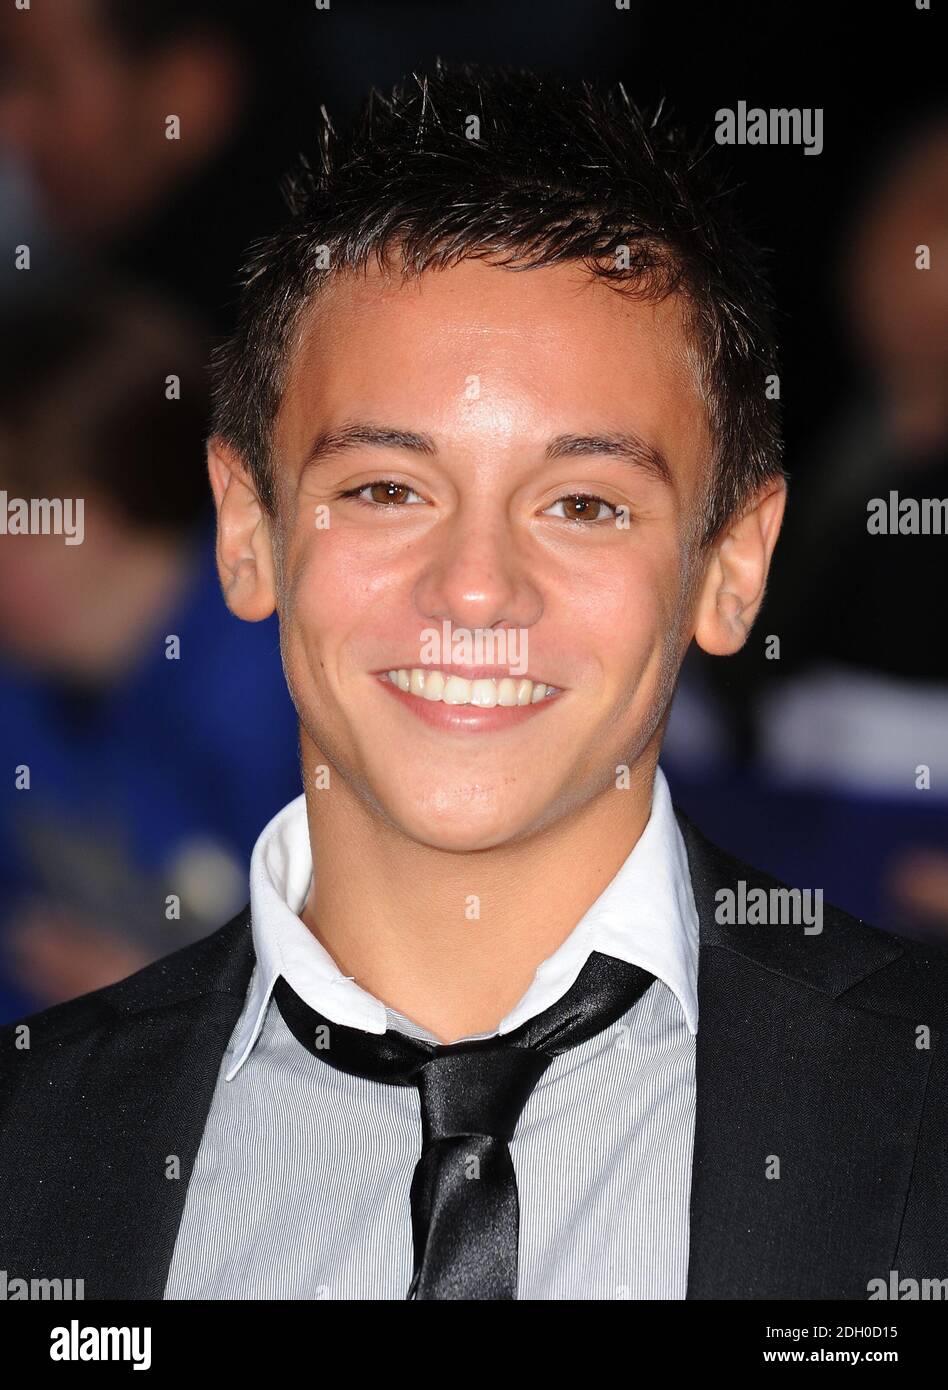 Tom Daley arriving at the Pride of Britain Awards 2008, London ...